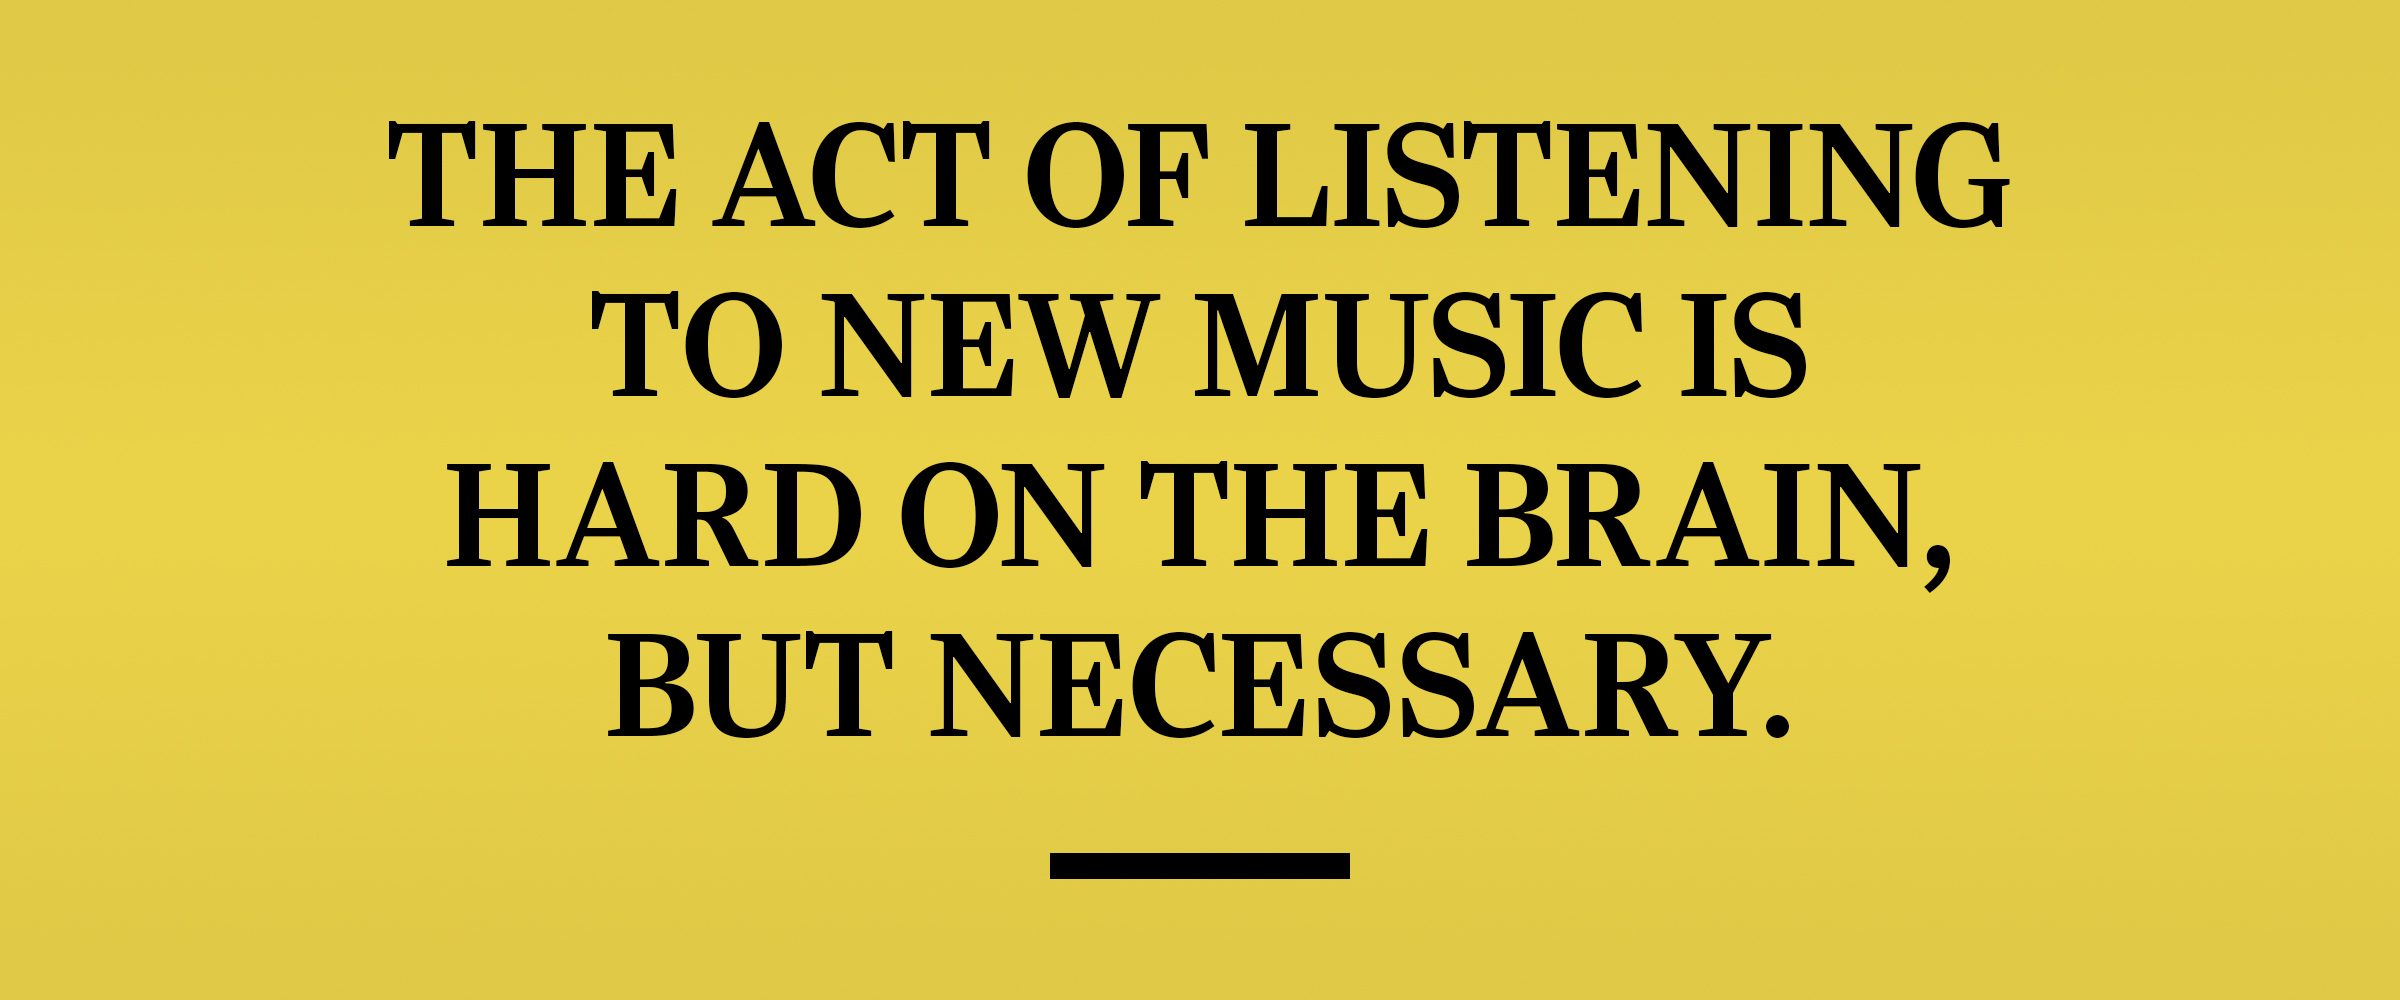 text: The act of listening to new music is hard on the brain, but necessary.